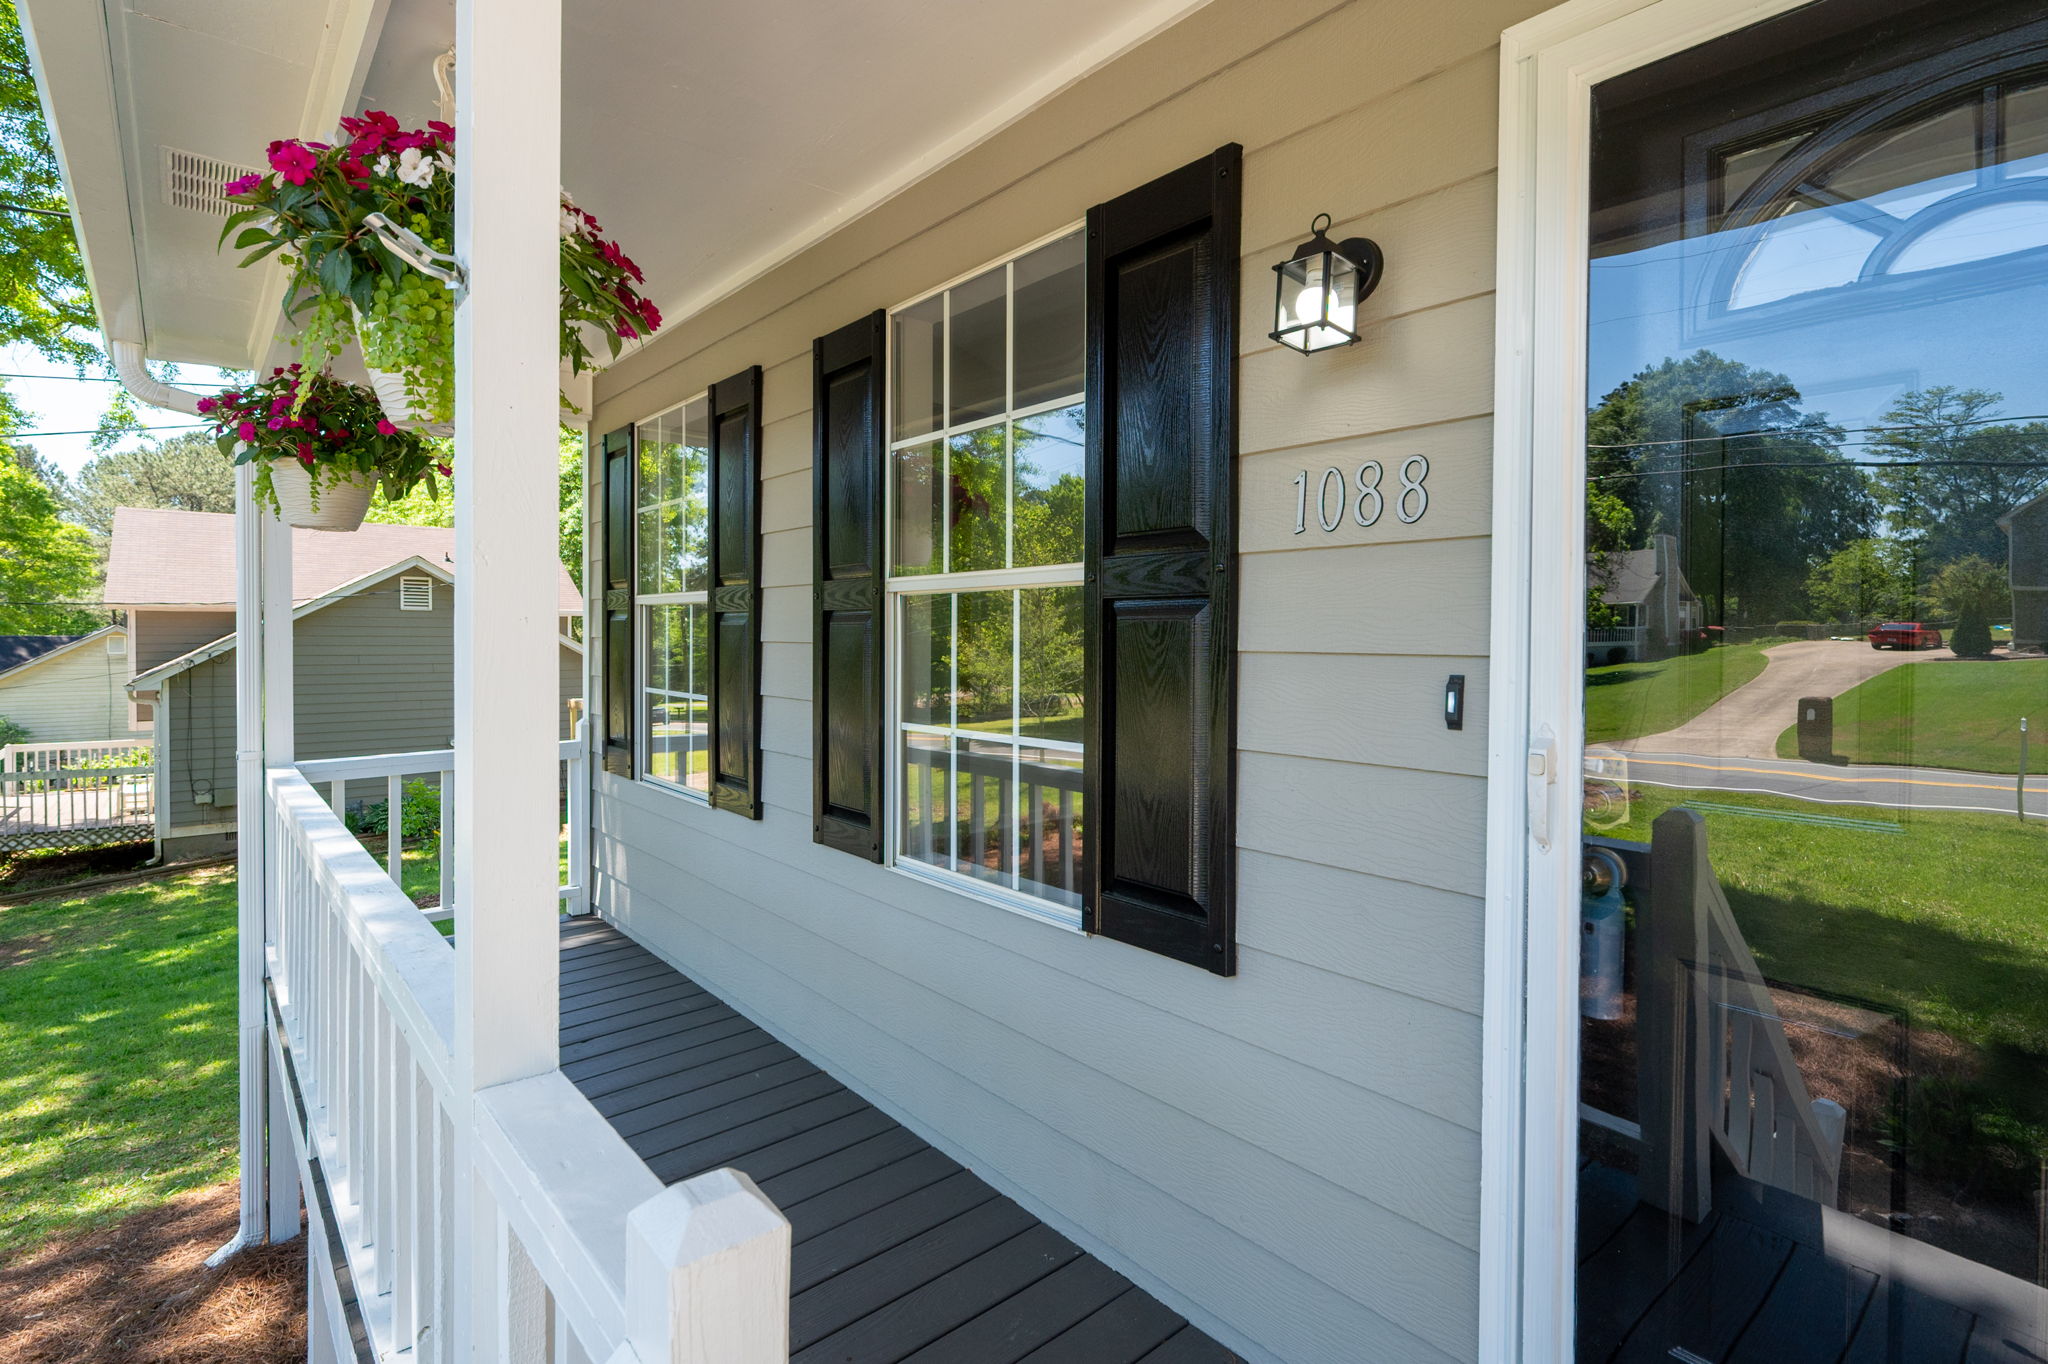 Sip your morning coffee on the newly painted front porch.